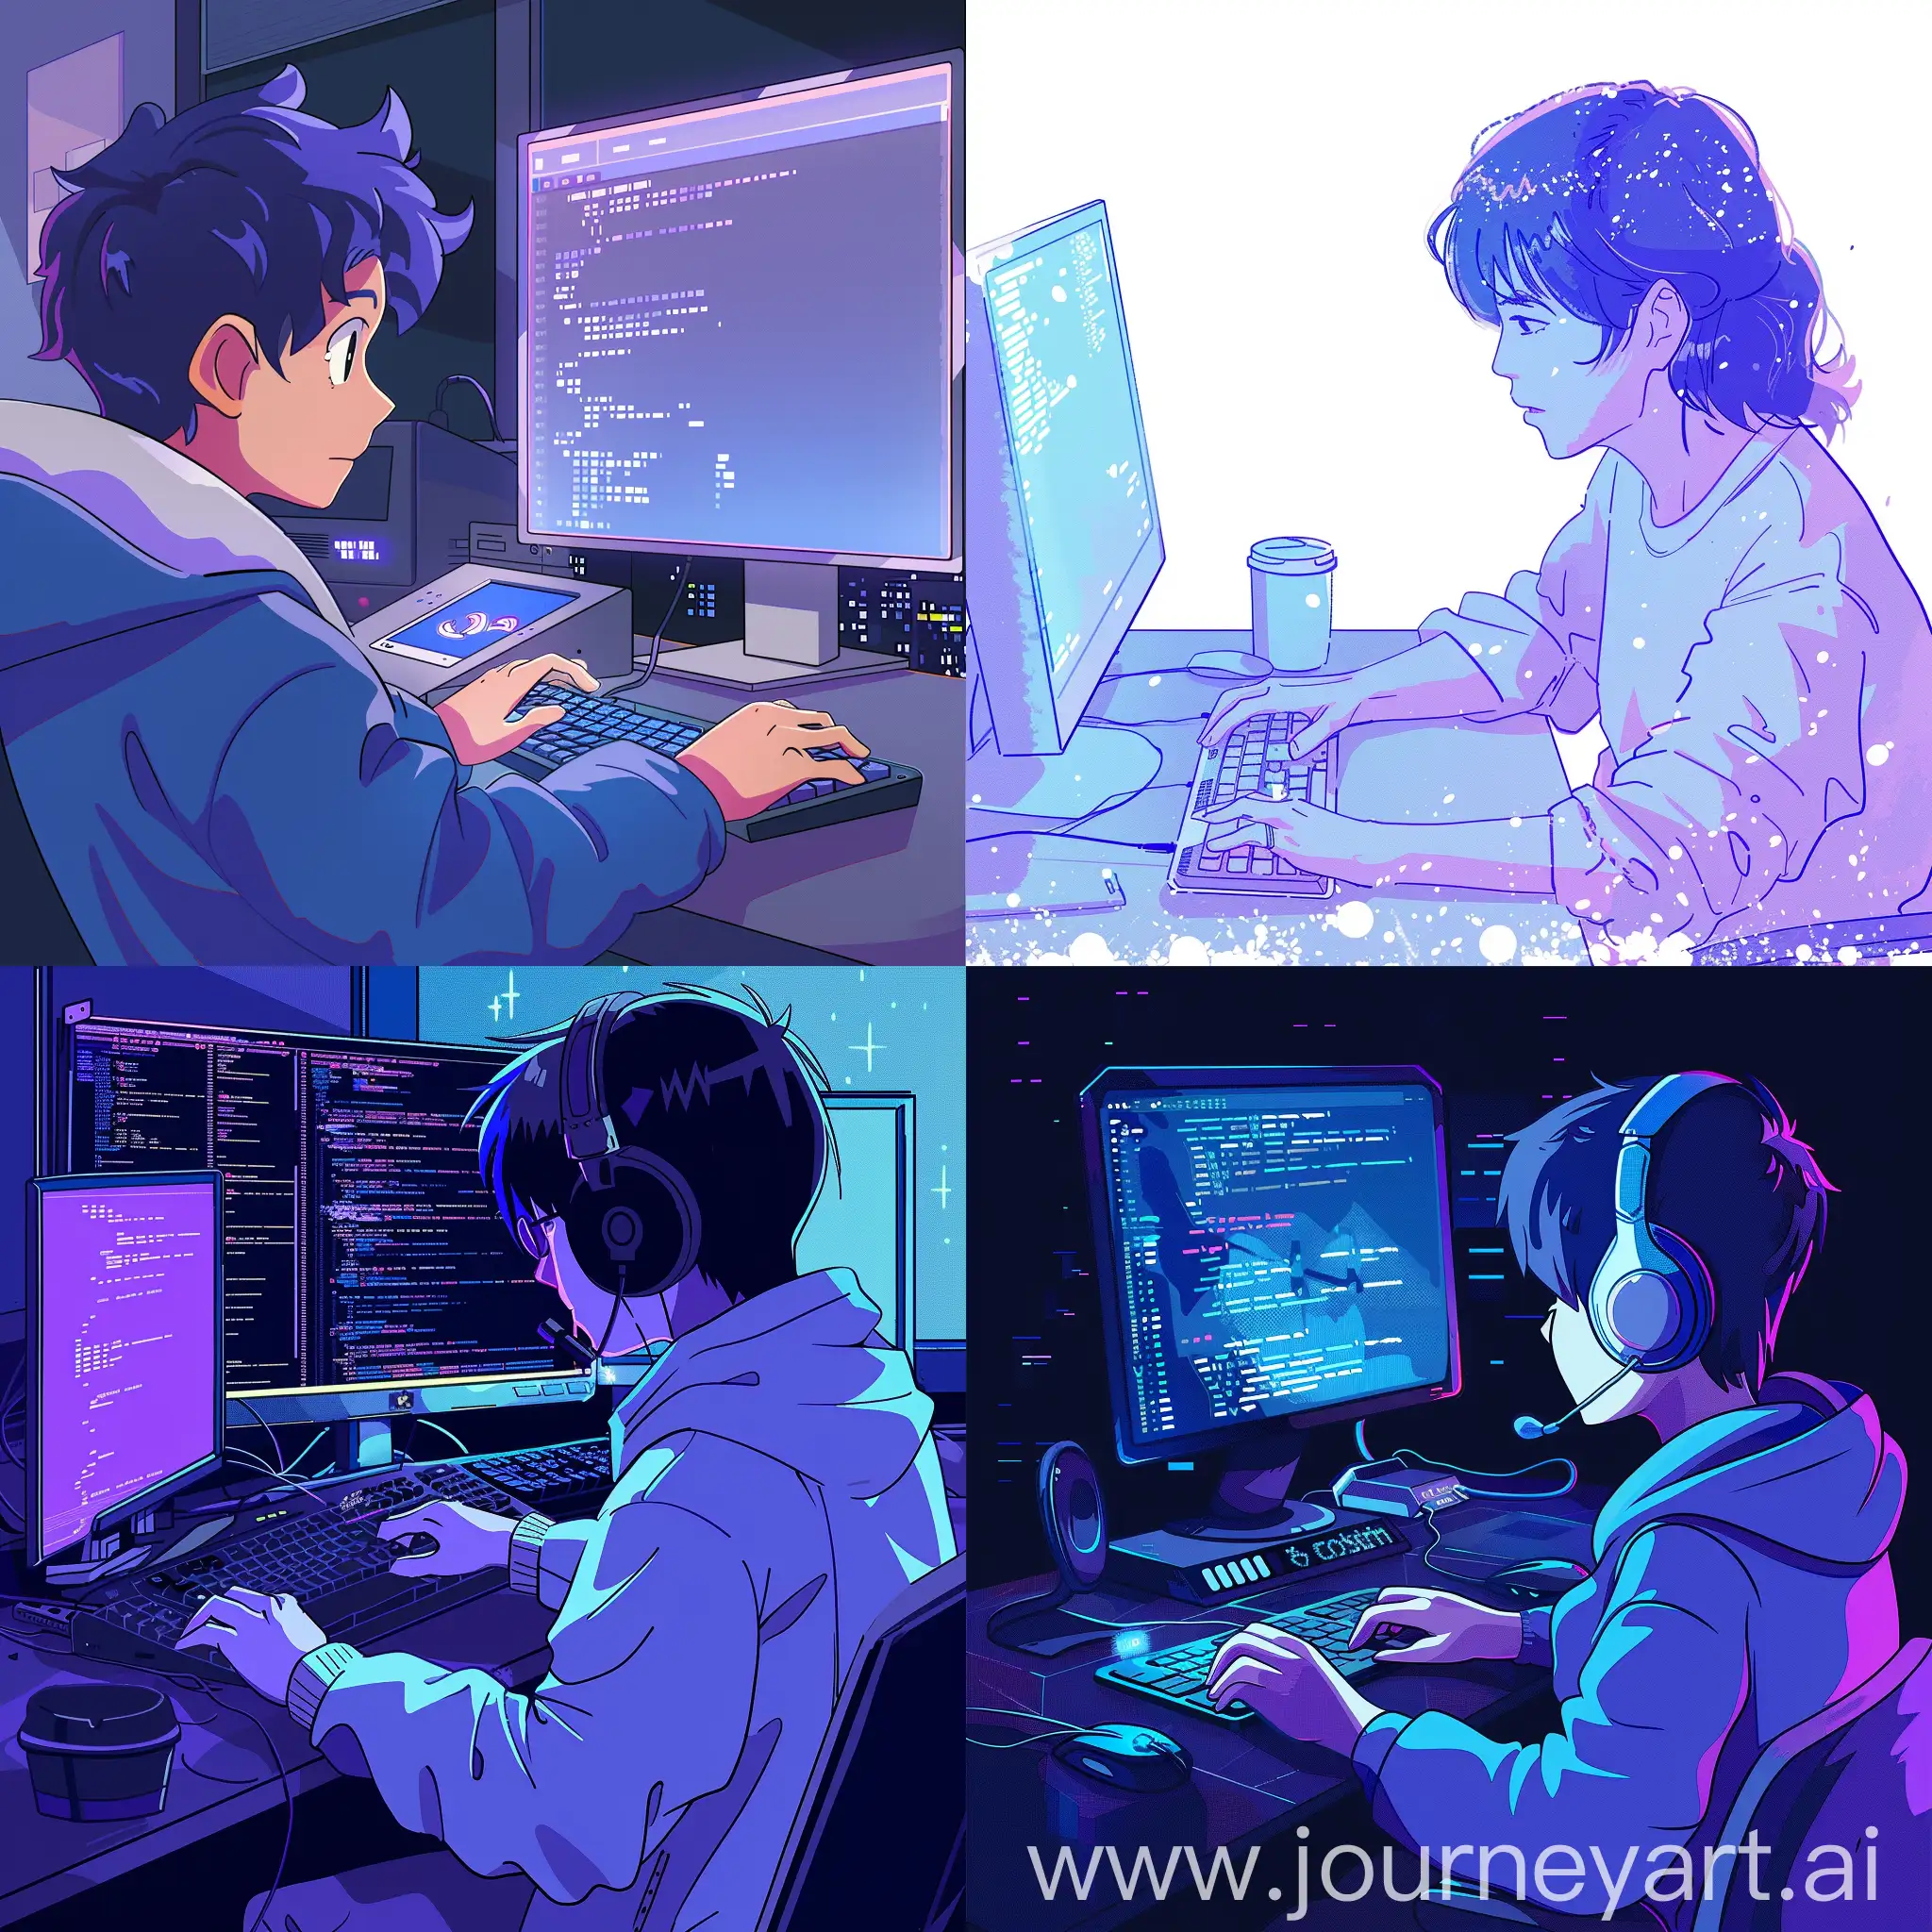 Programmer-Coding-in-Vibrant-Blue-and-Purple-Japanese-Animation-Style